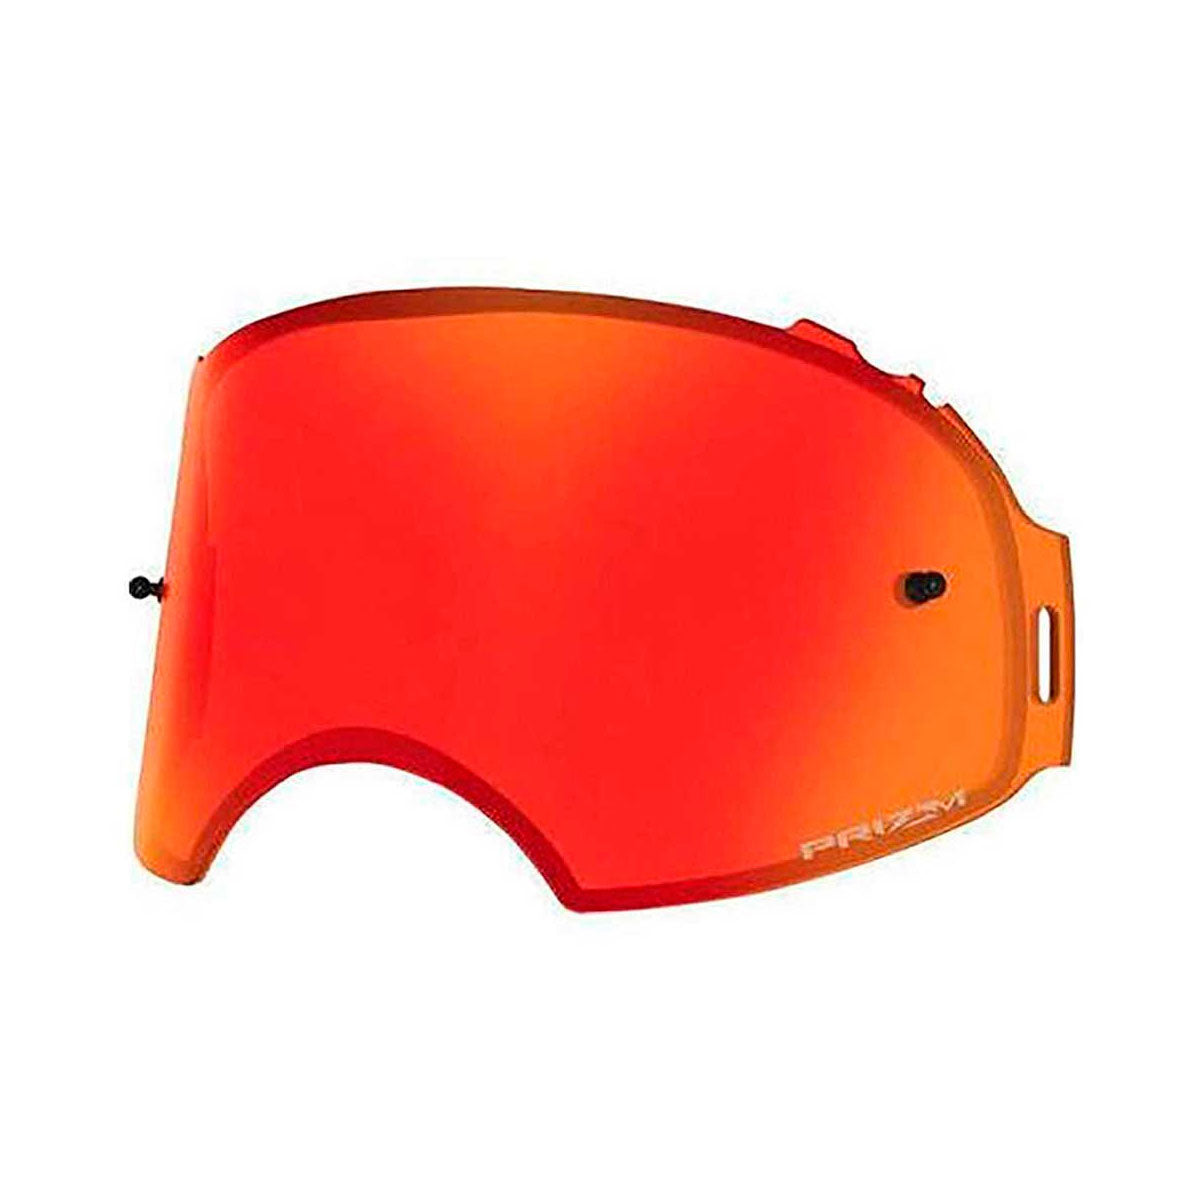 OAKLEY - AIRBRAKE MX REPLACEMENT - MICA MX PRIZM TORCH